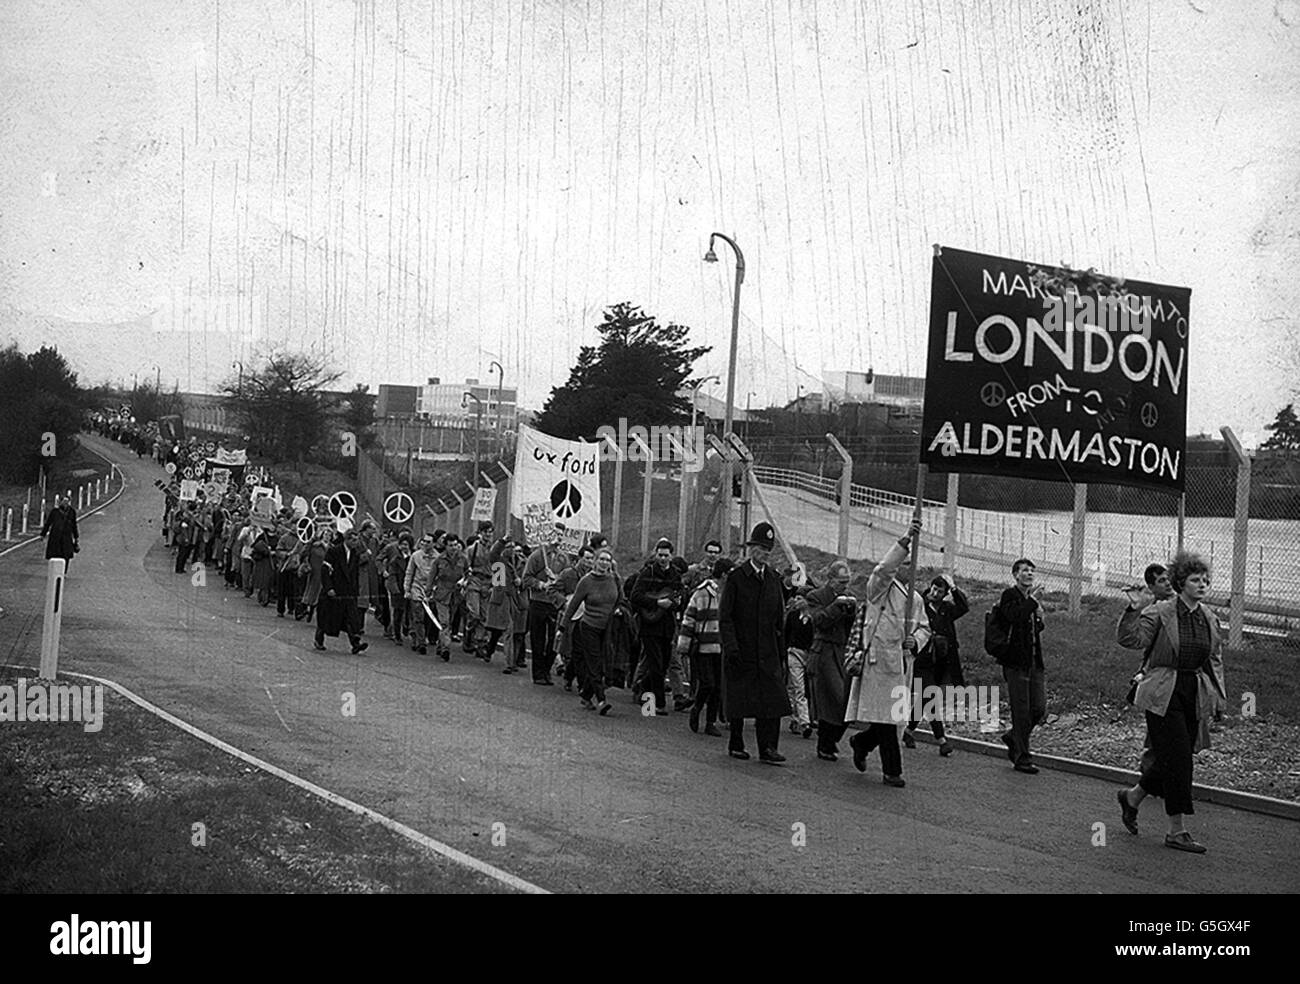 With a solitary policeman as escort, campaigners for nuclear disarmament begin their march from the Atomic Weapons Research Establishment at Aldermaston, Berkshire, to London. They face a 53 mile trek to Trafalgar Square. Stock Photo